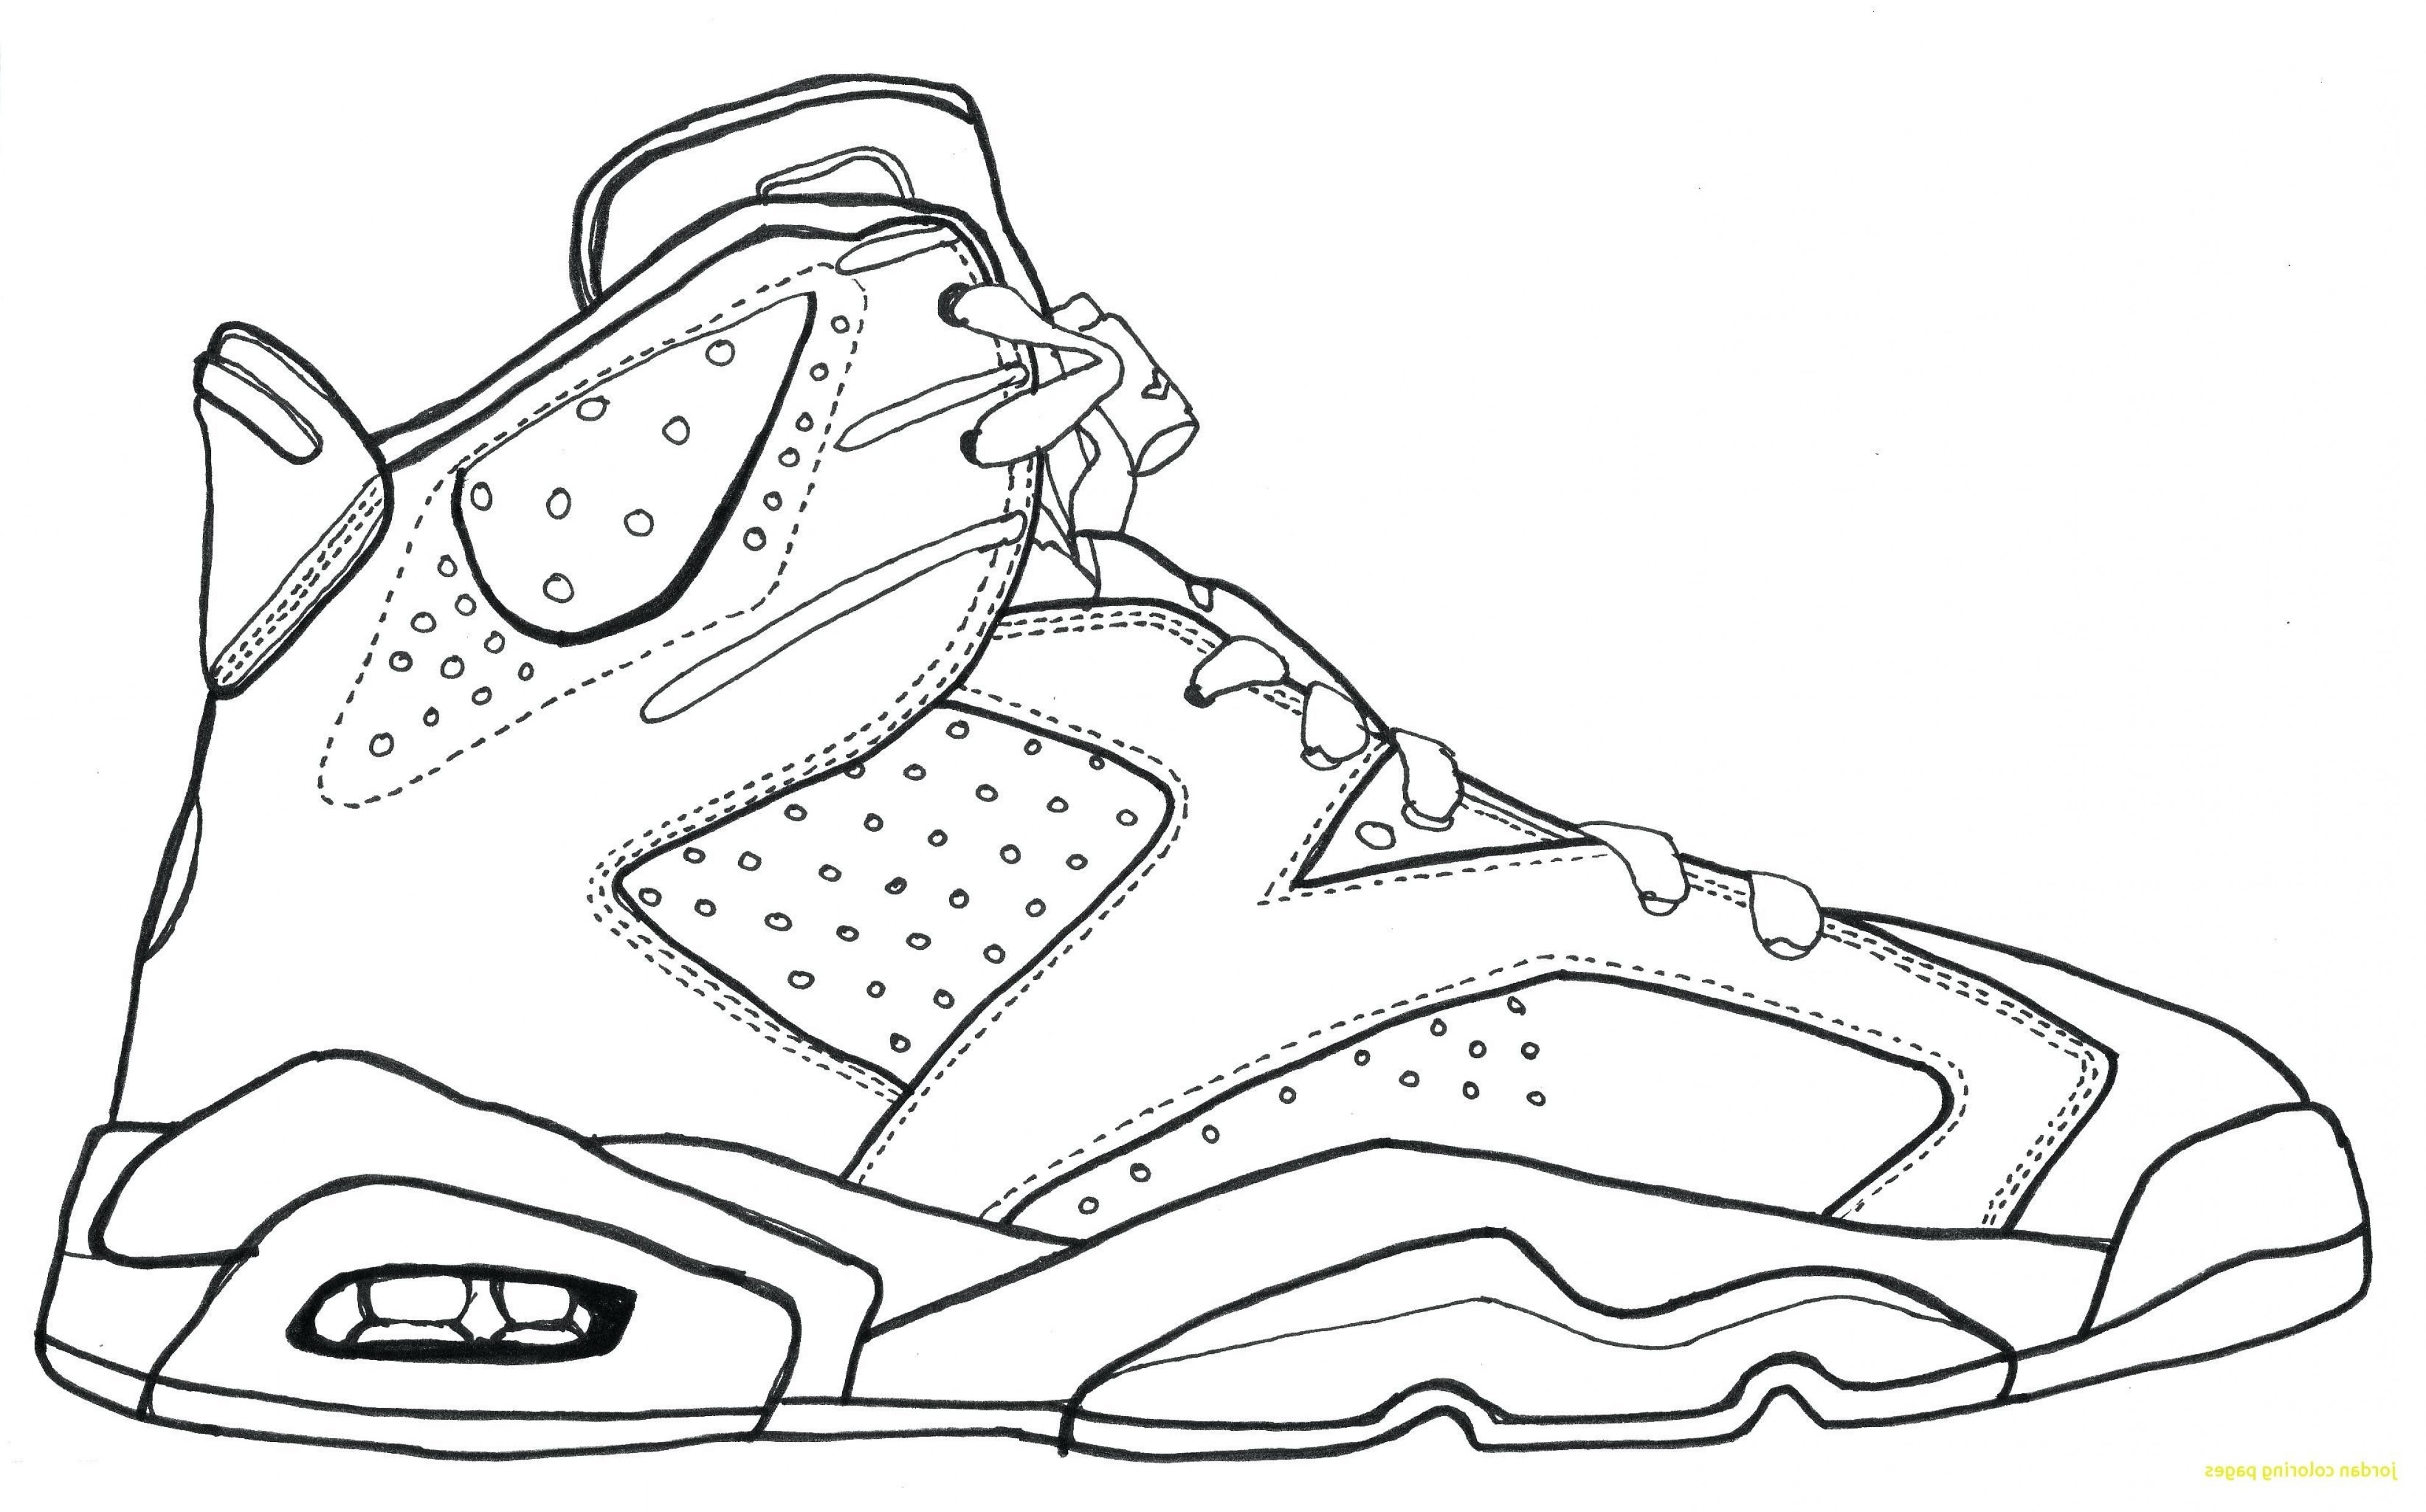 27+ Creative Picture of Shoes Coloring Pages - albanysinsanity.com